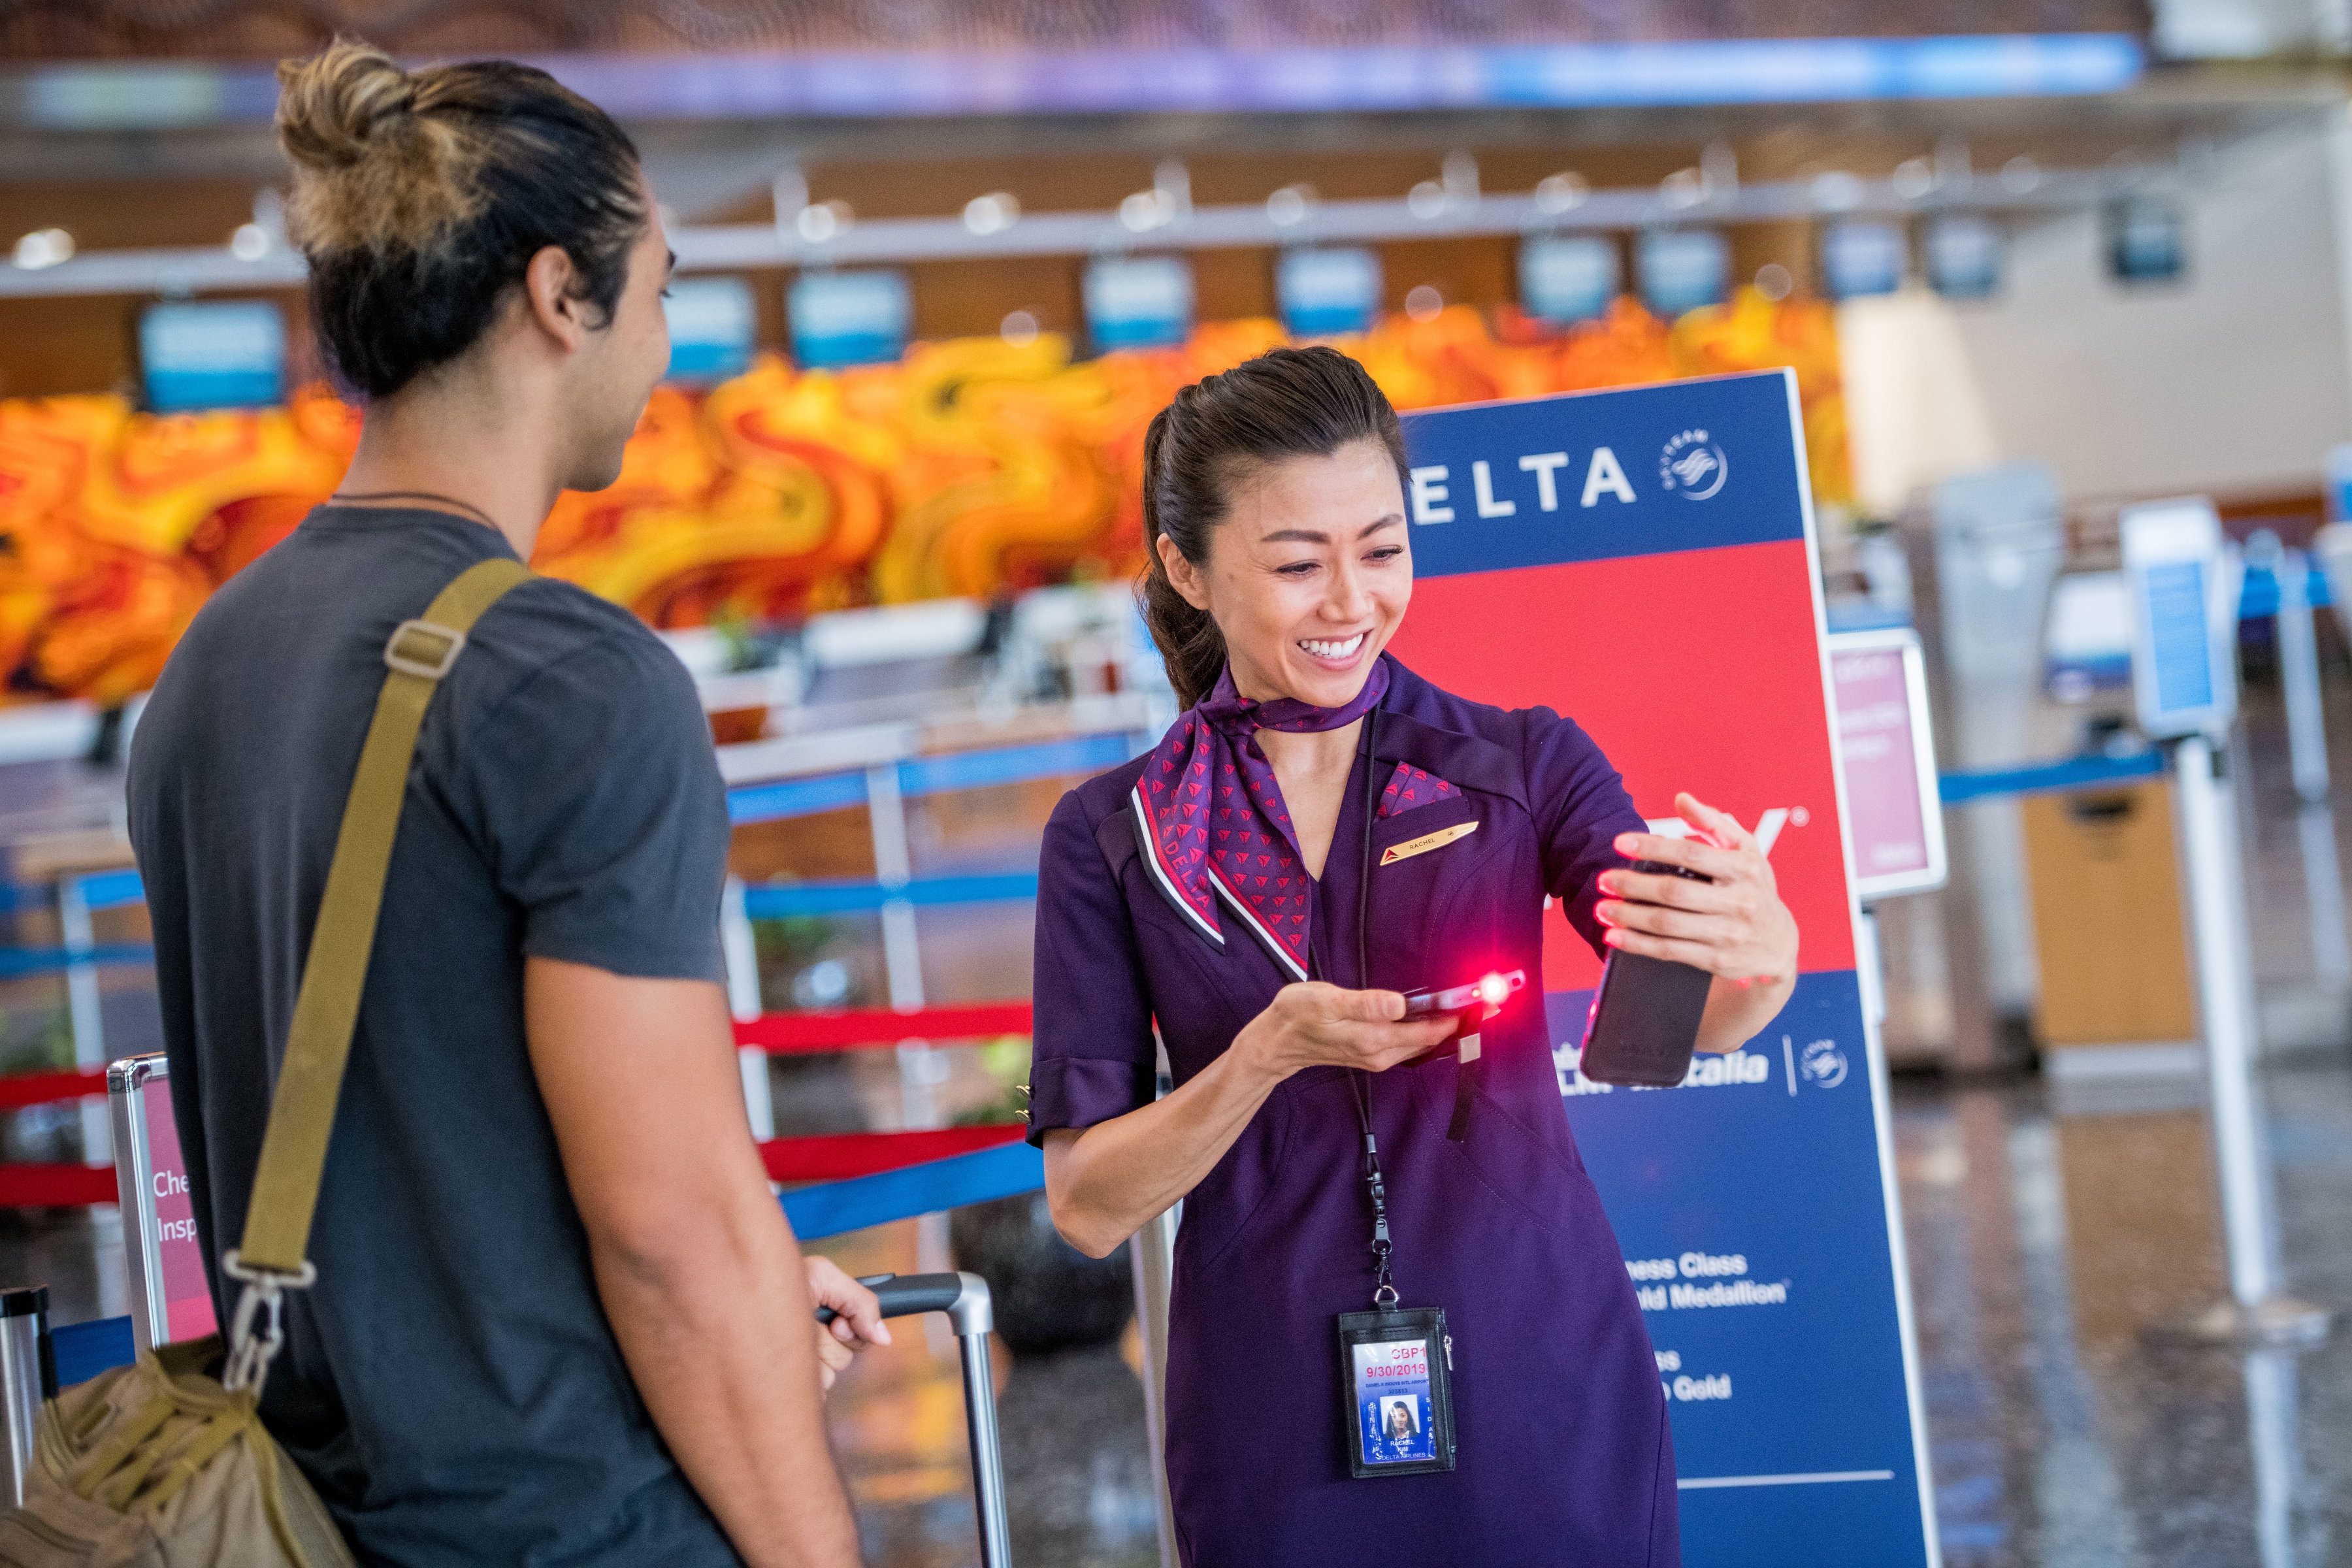 Delta Airlines Customer Service Phone Number